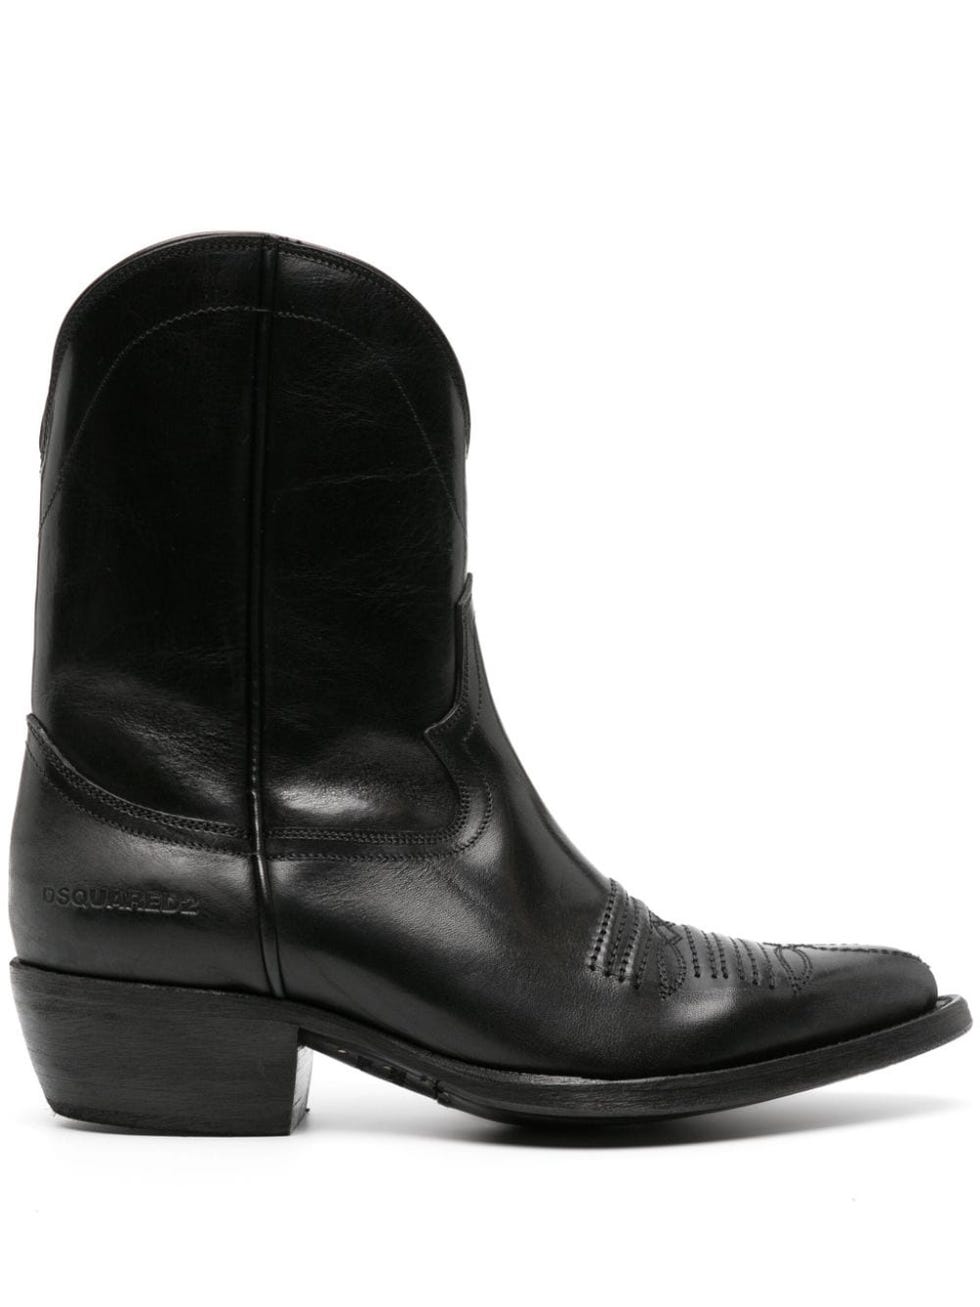 Dsquared2 50mm leather western boots